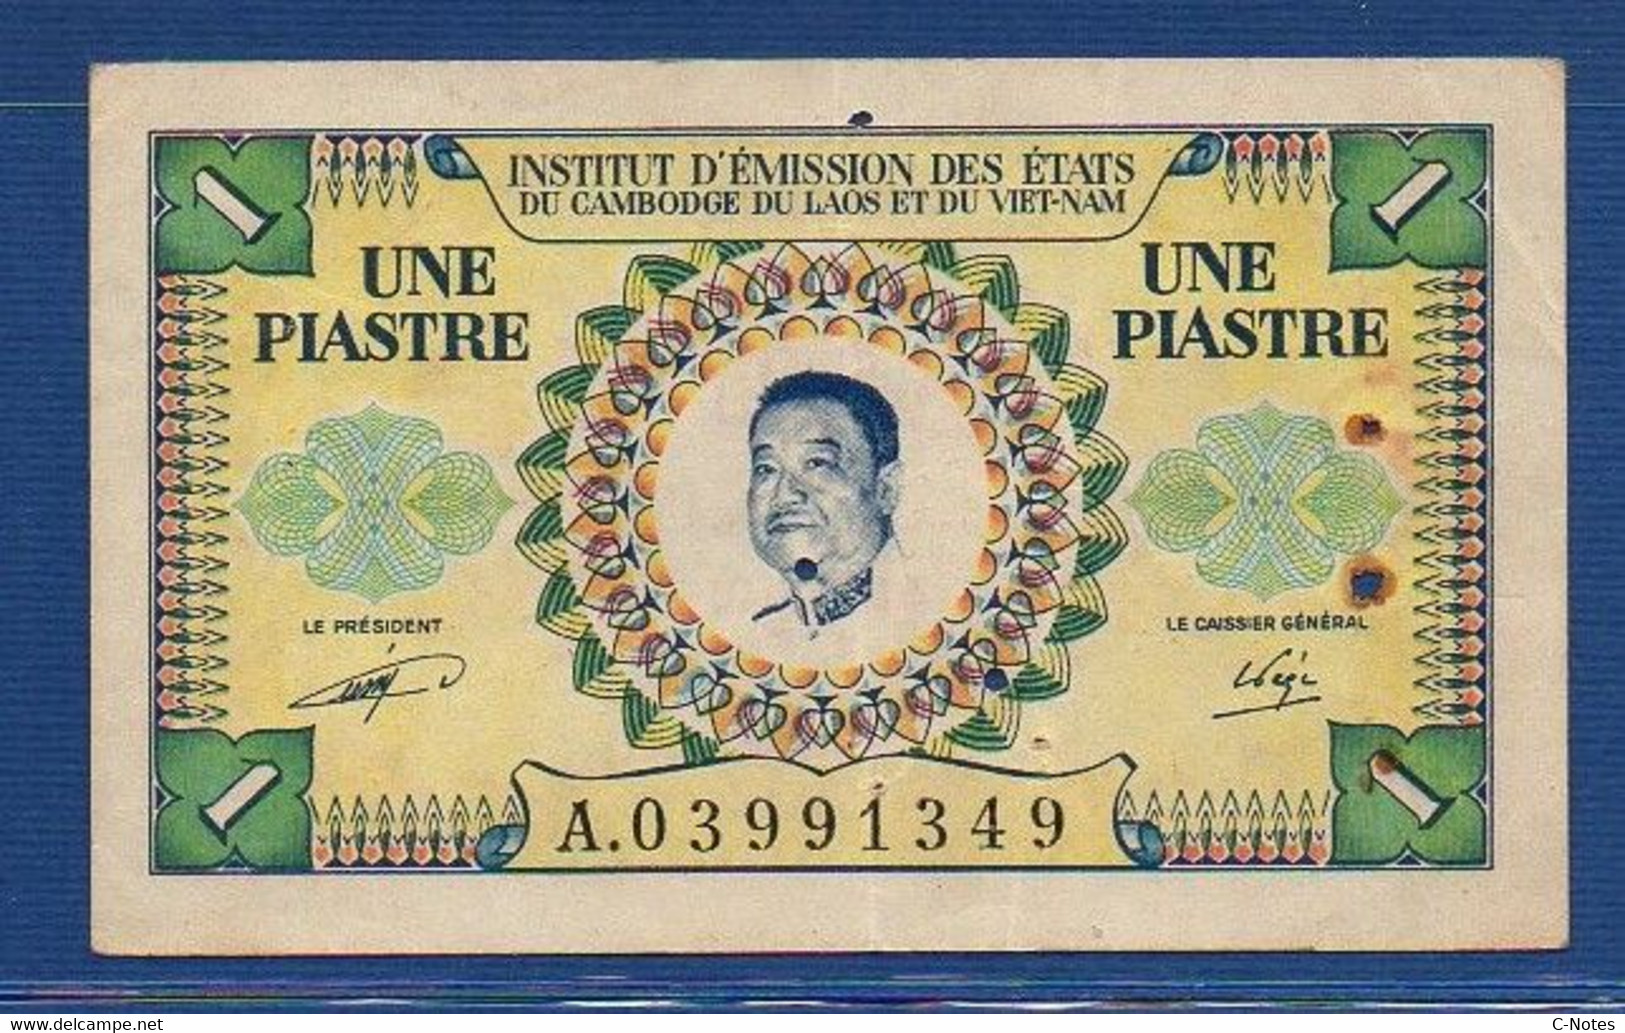 FRENCH INDOCHINA - P. 99 –  1 Piastre ND (1953) F/VF, S/n A.03991349 - Indochine